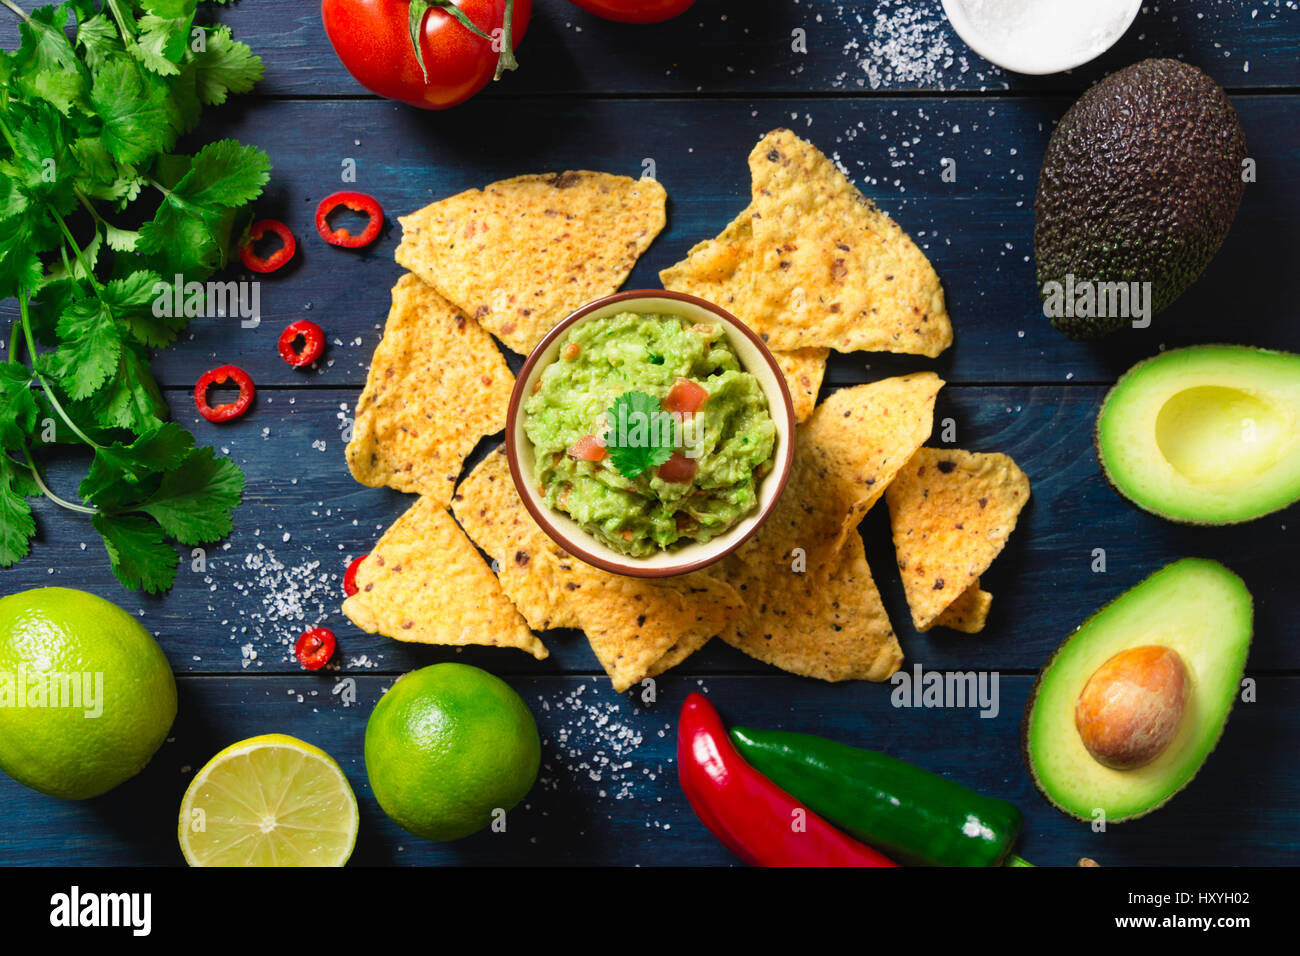 Guacamole bowl with ingredients and tortilla chips on a blue painted wooden table. Top view Stock Photo